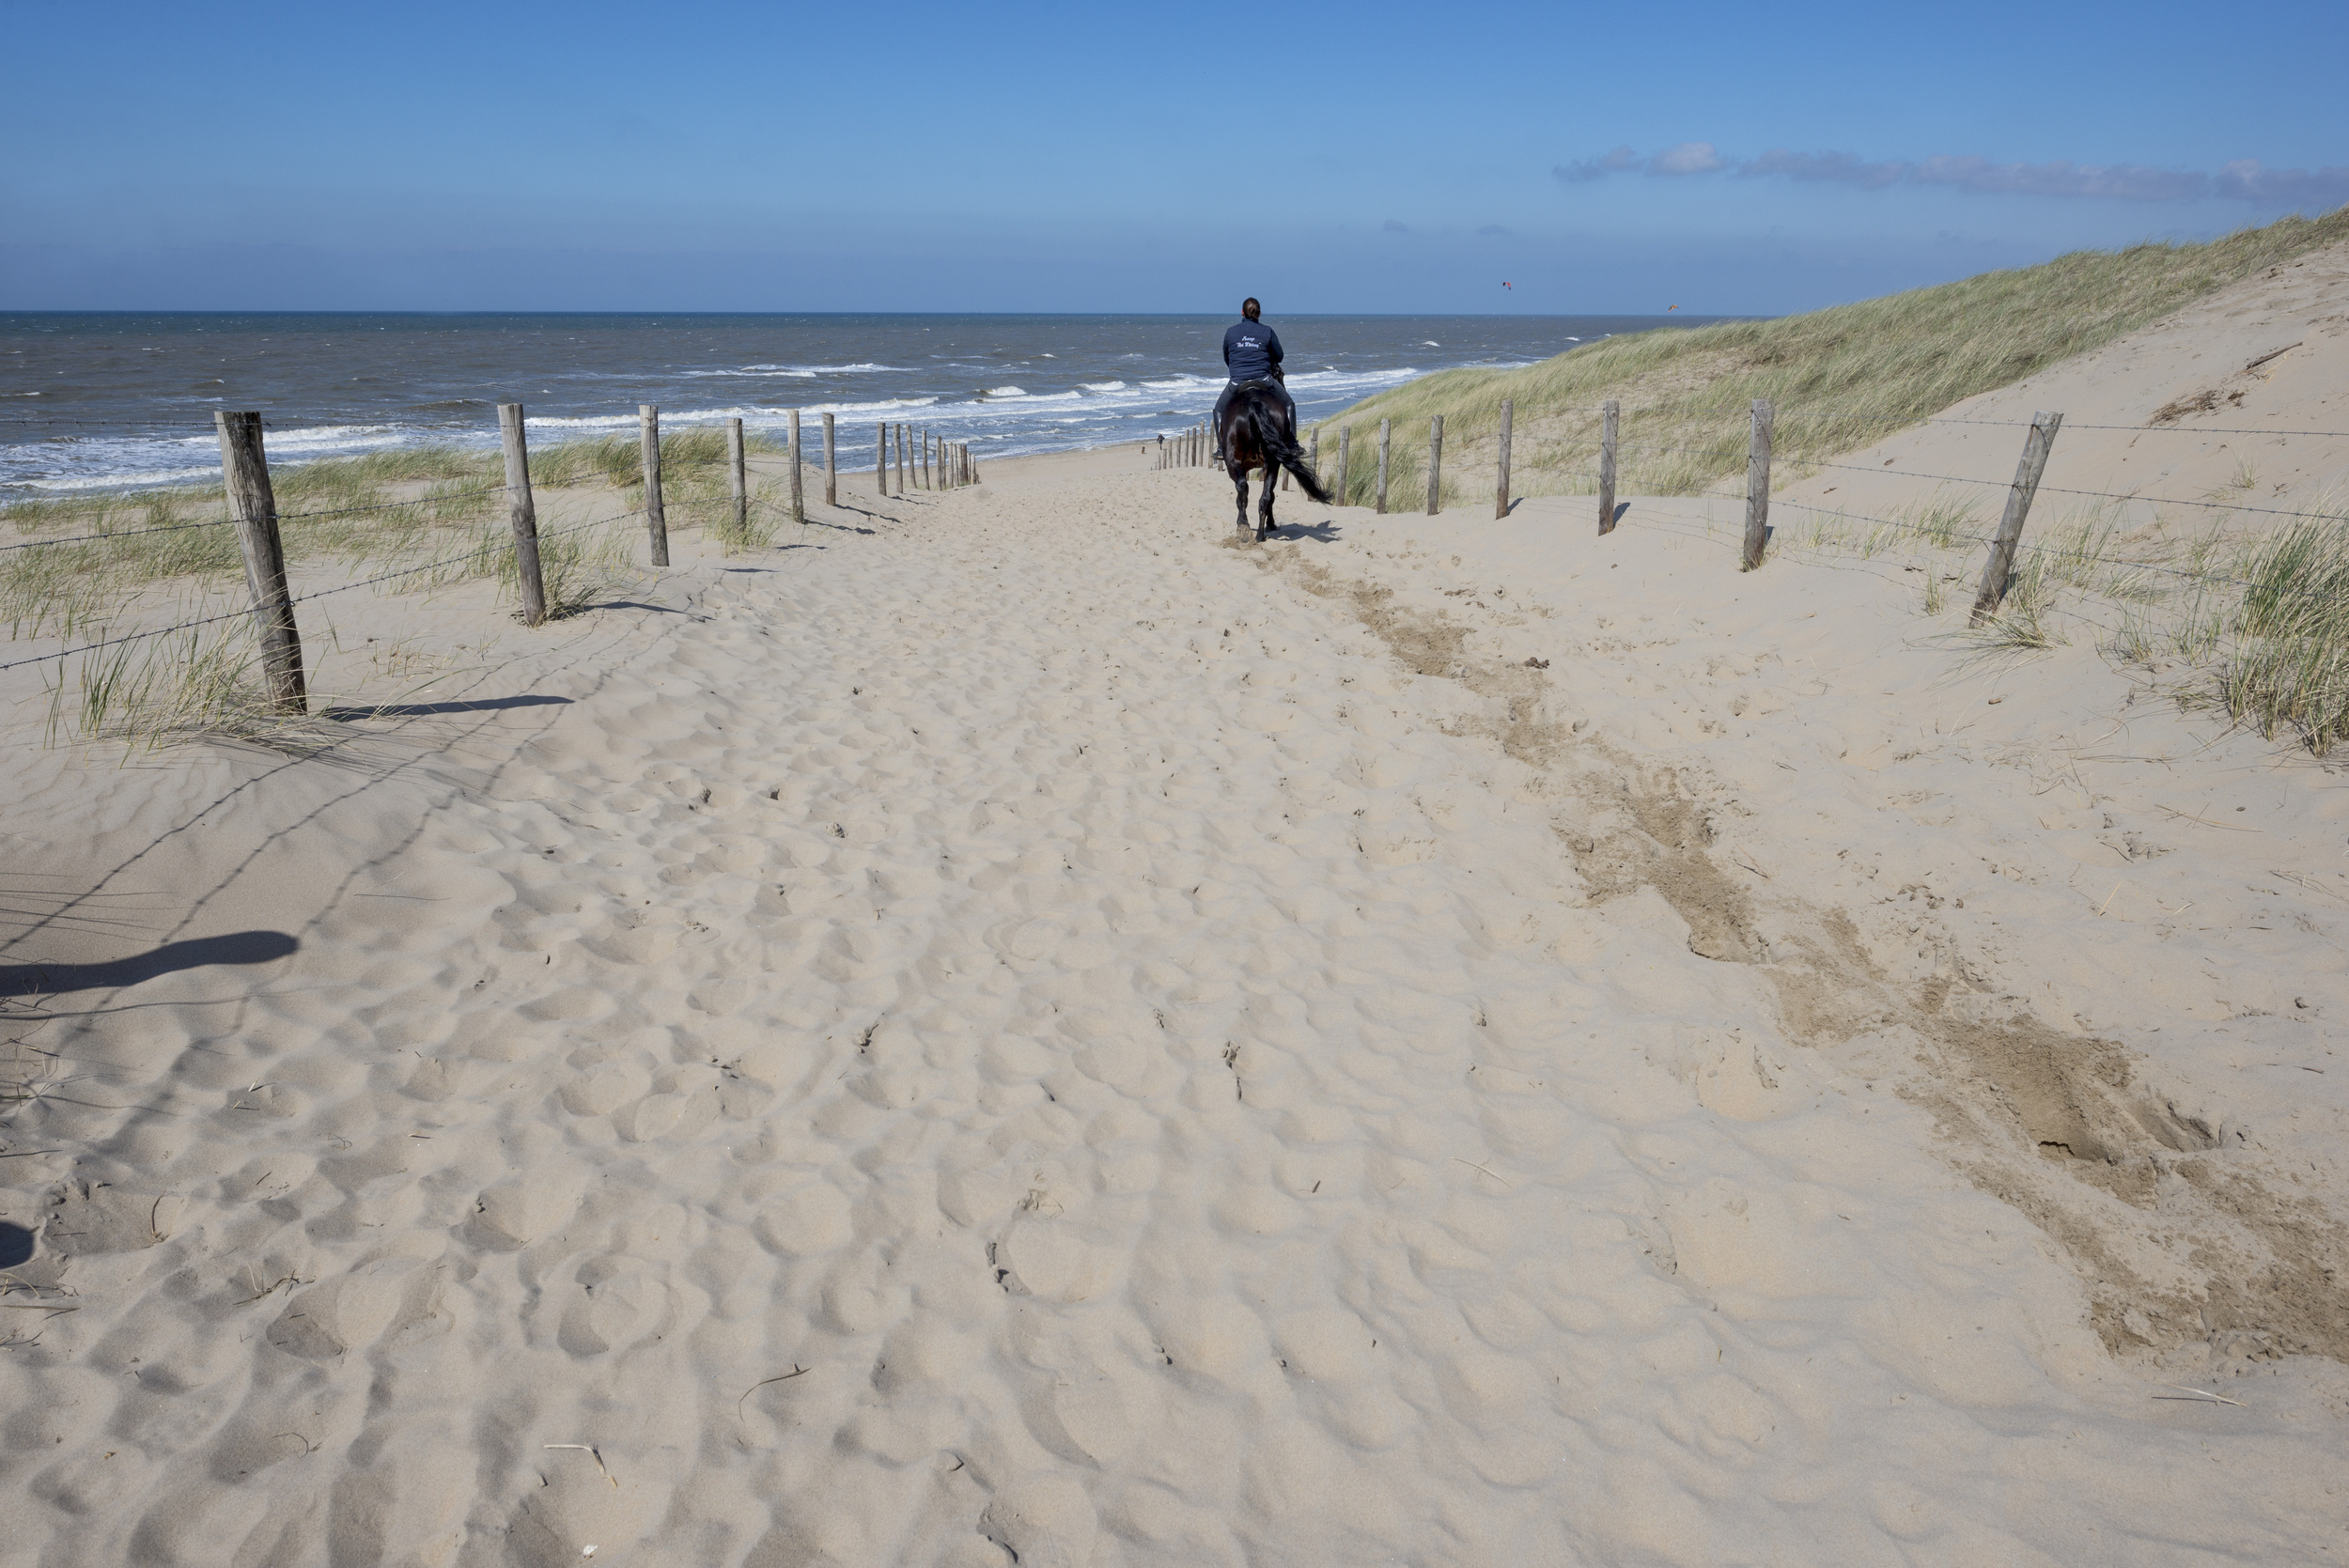 <p>The province of Zeeland in the south of the country is a well-kept secret European beach destination. One of the best ways to explore it is on the back of a horse. And luckily, the shores of the Atlantic are home to numerous barns that offer riding tours of the area.</p><p><a href='https://www.msn.com/en-us/community/channel/vid-cj9pqbr0vn9in2b6ddcd8sfgpfq6x6utp44fssrv6mc2gtybw0us'>Follow us on MSN to see more of our exclusive lifestyle content.</a></p>